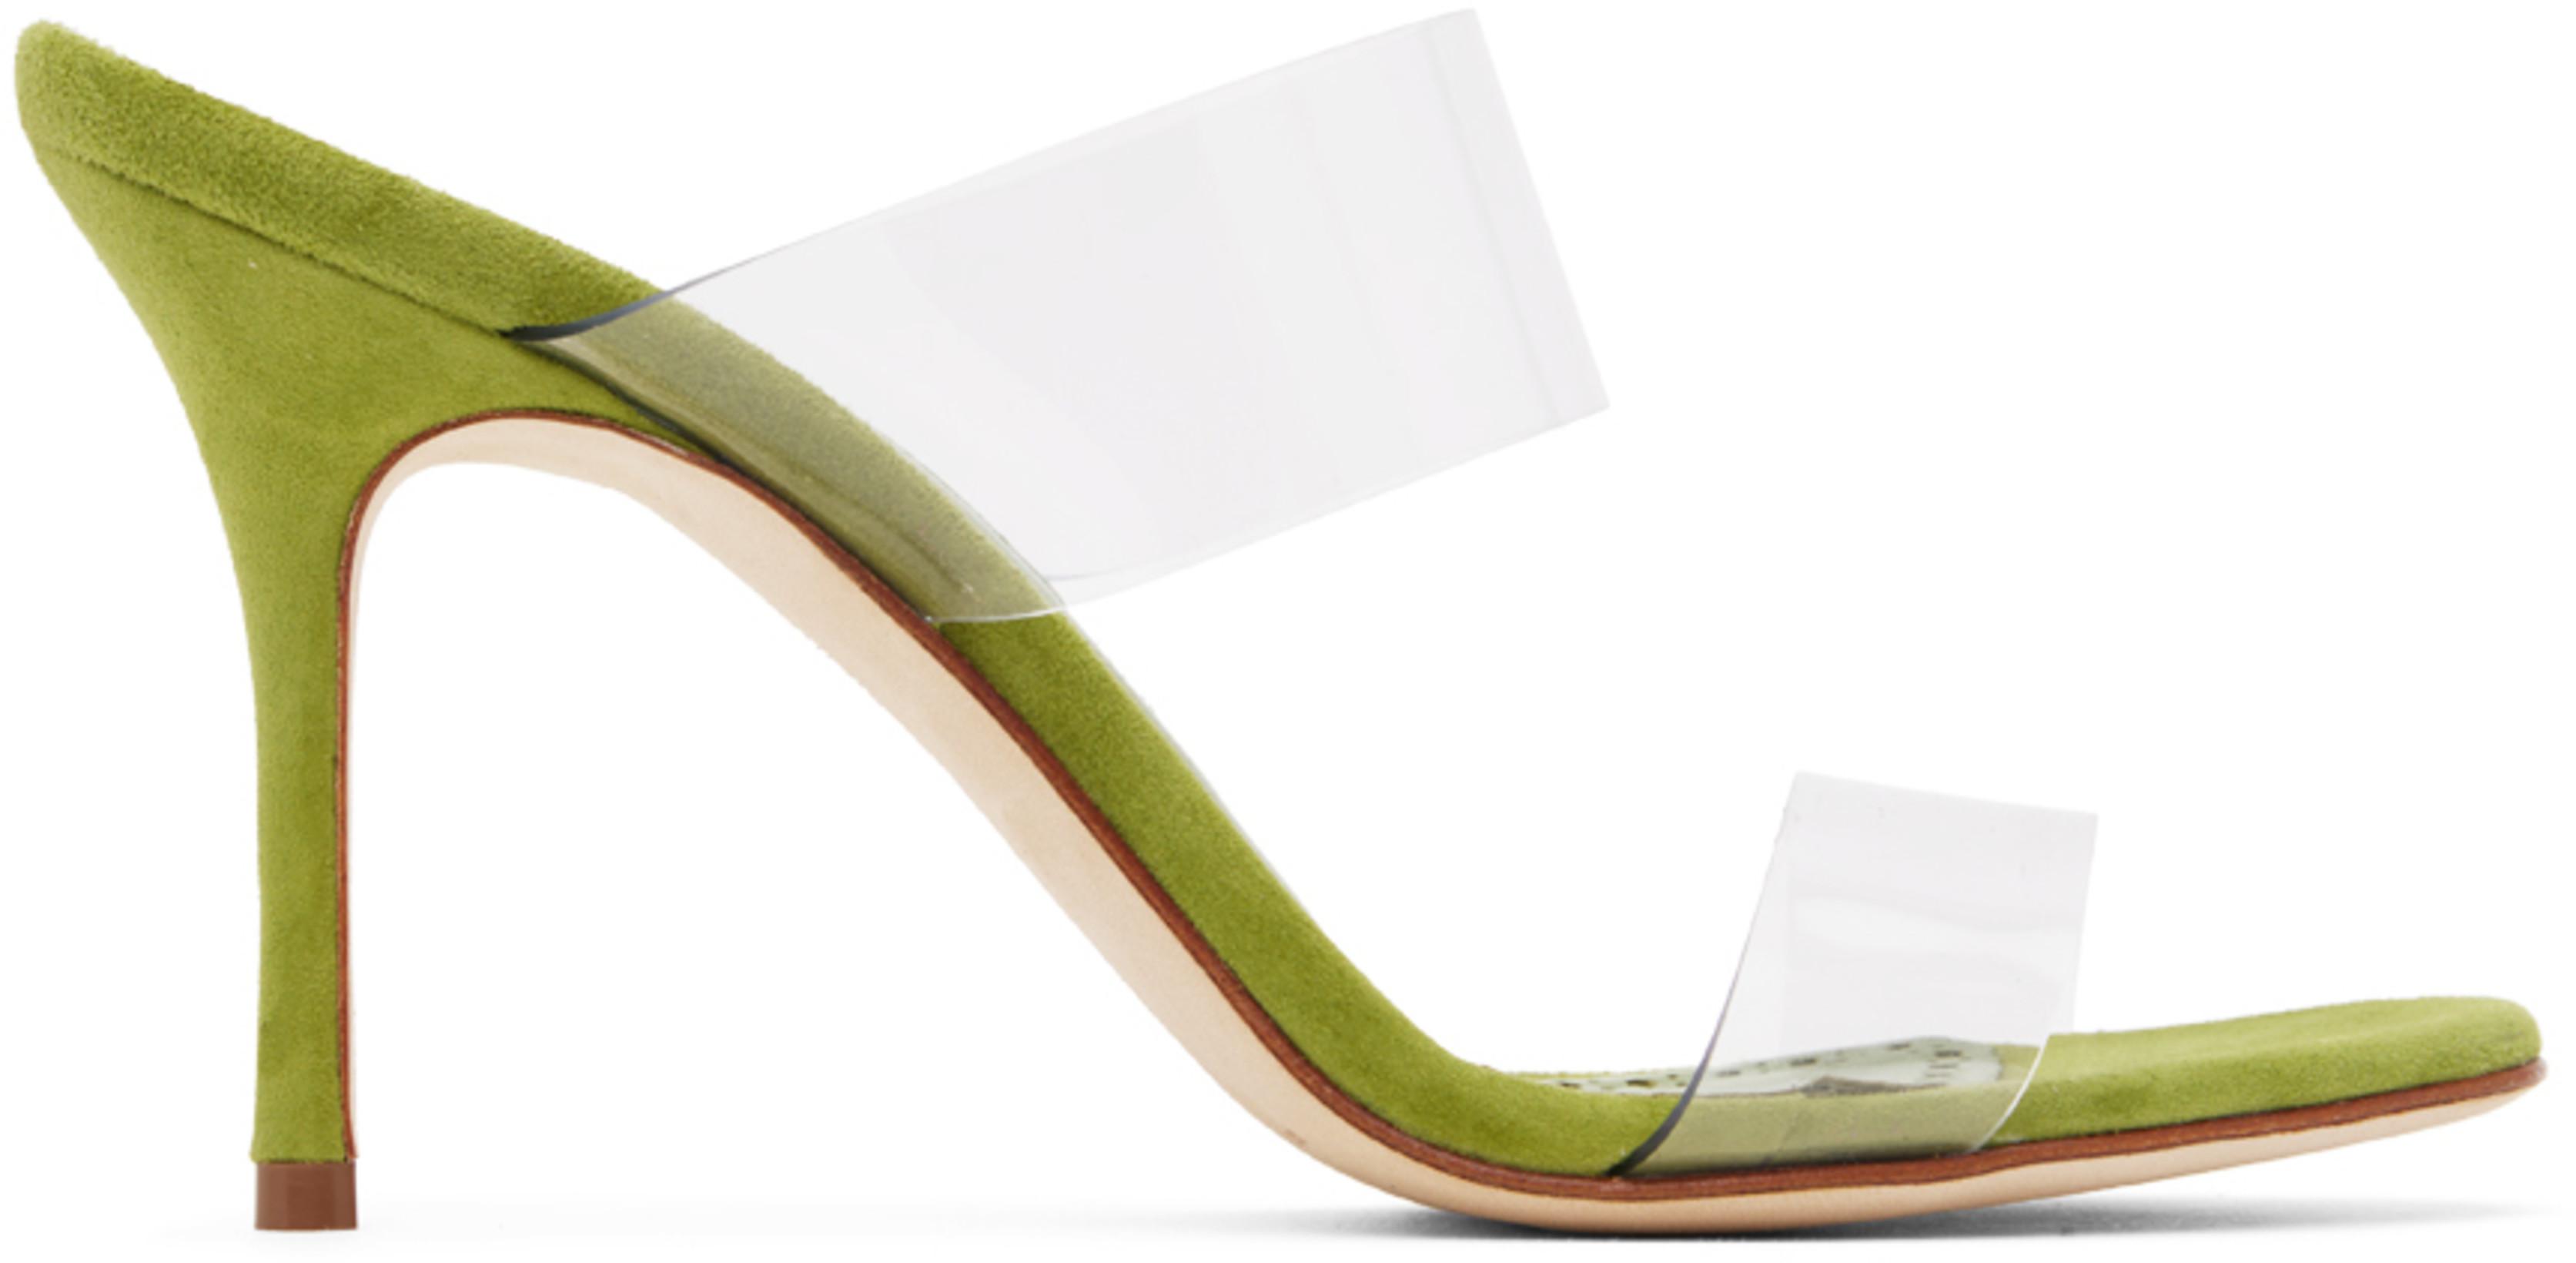 Green Scolto Heeled Sandals by MANOLO BLAHNIK